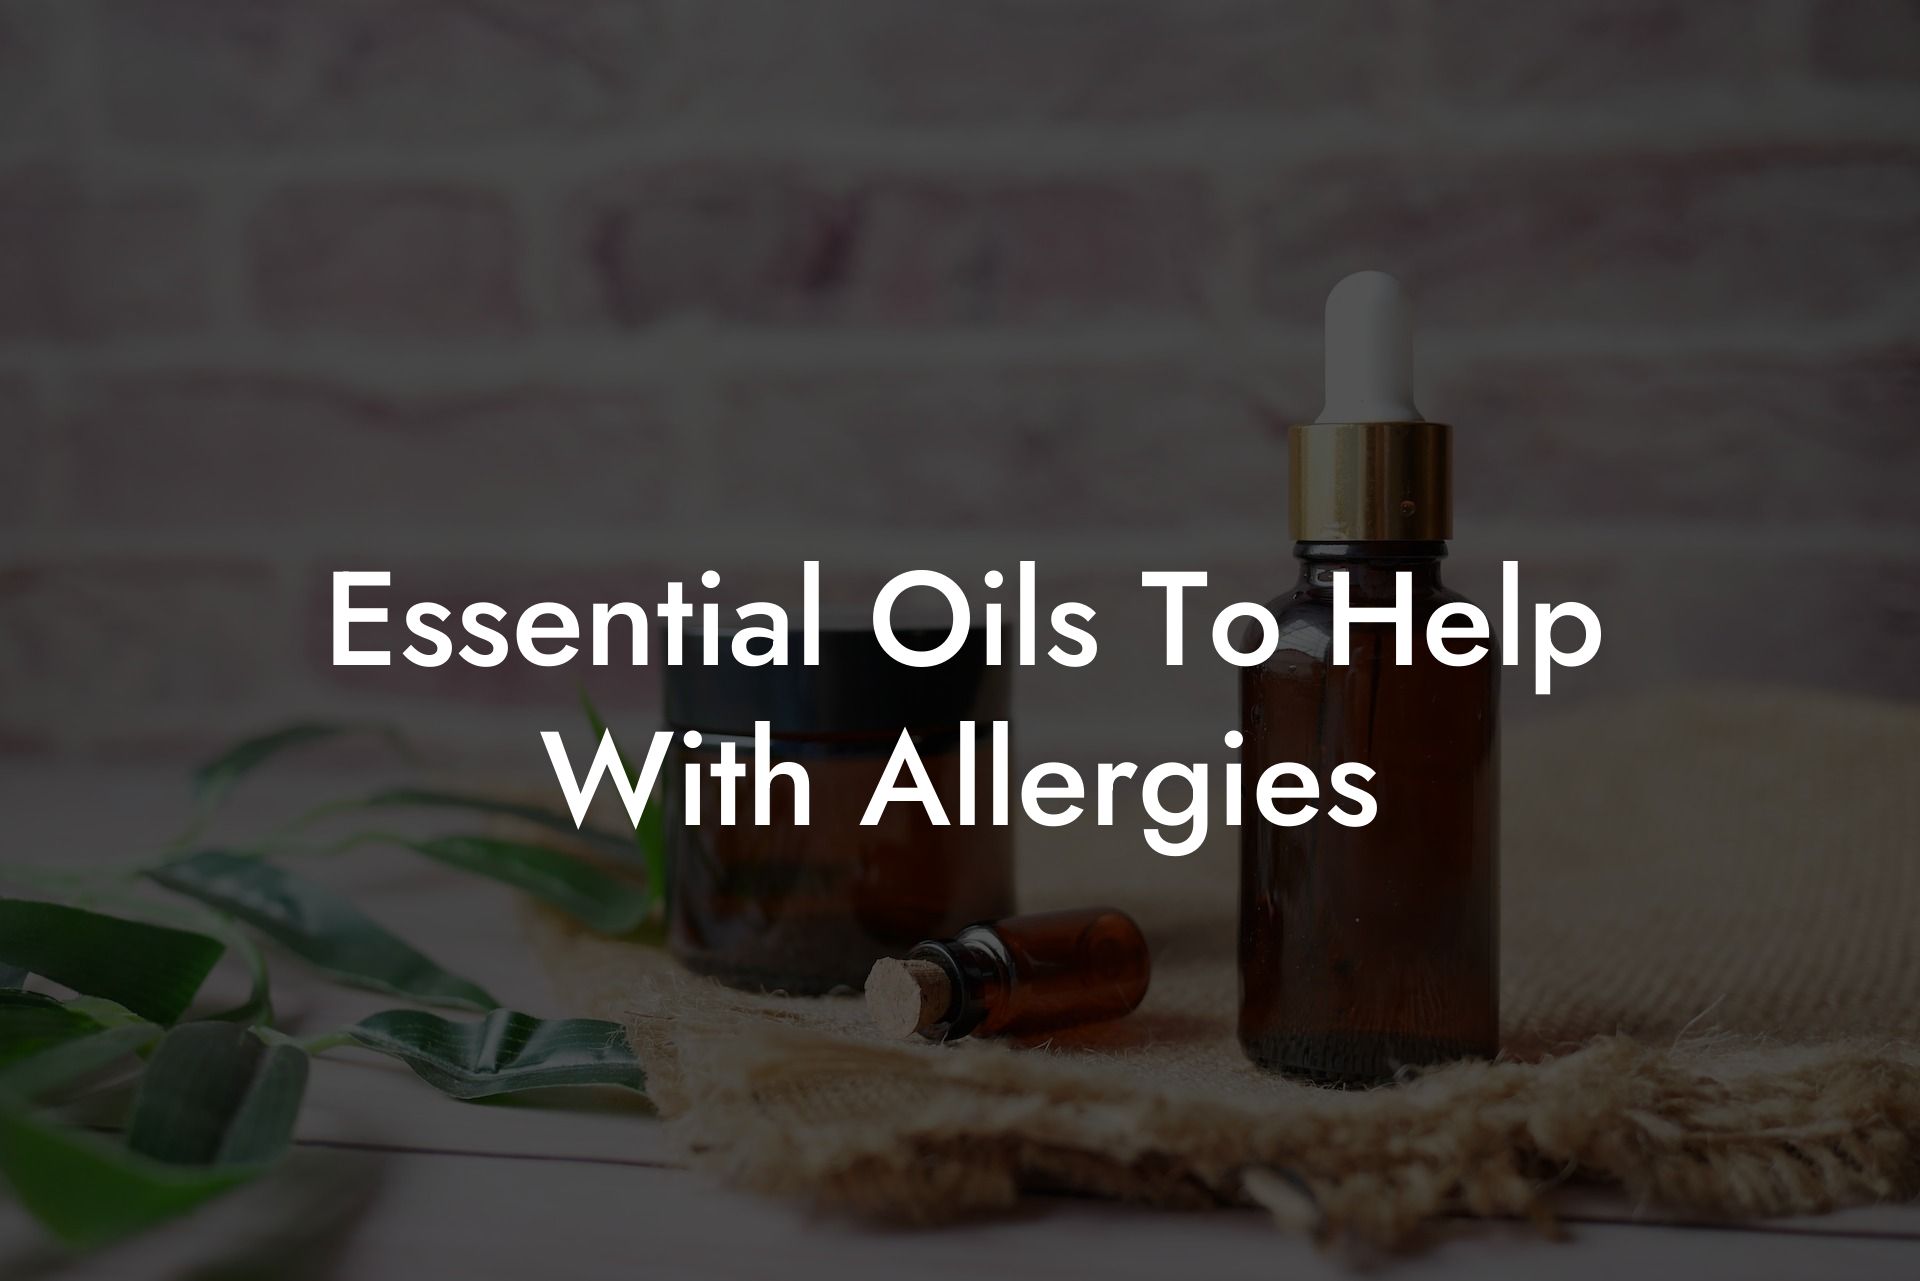 Essential Oils To Help With Allergies